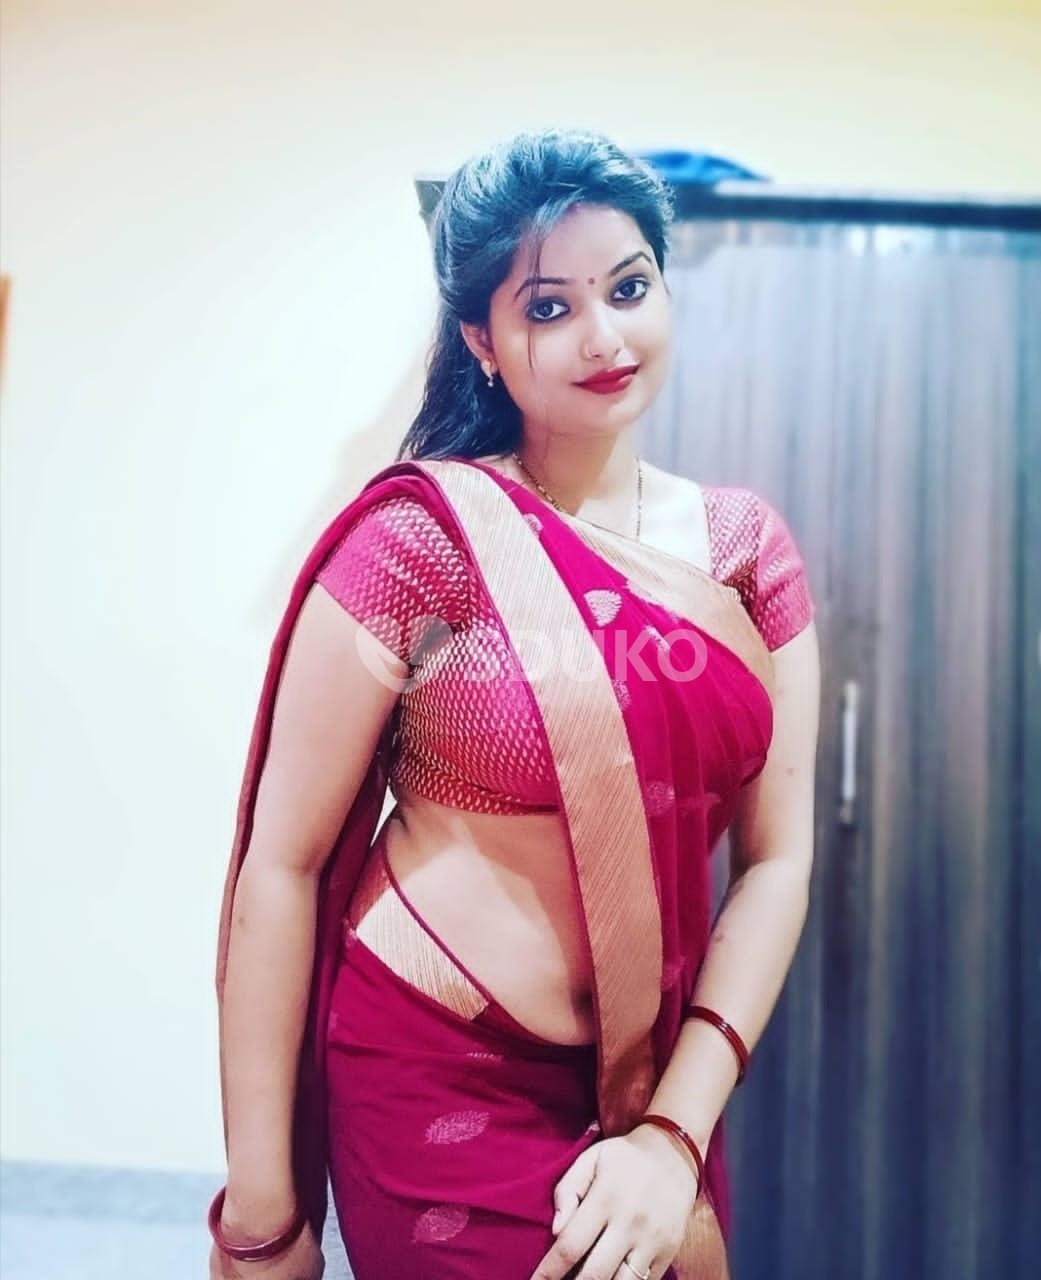 Coimbatore BEST CALL GIRL ESCORTS SERVICE IN/OUT VIP INDEPENDENT CALL GIRLS SERVICE ALL SEX ALLOW BOOK NOW WHATSAPP mass